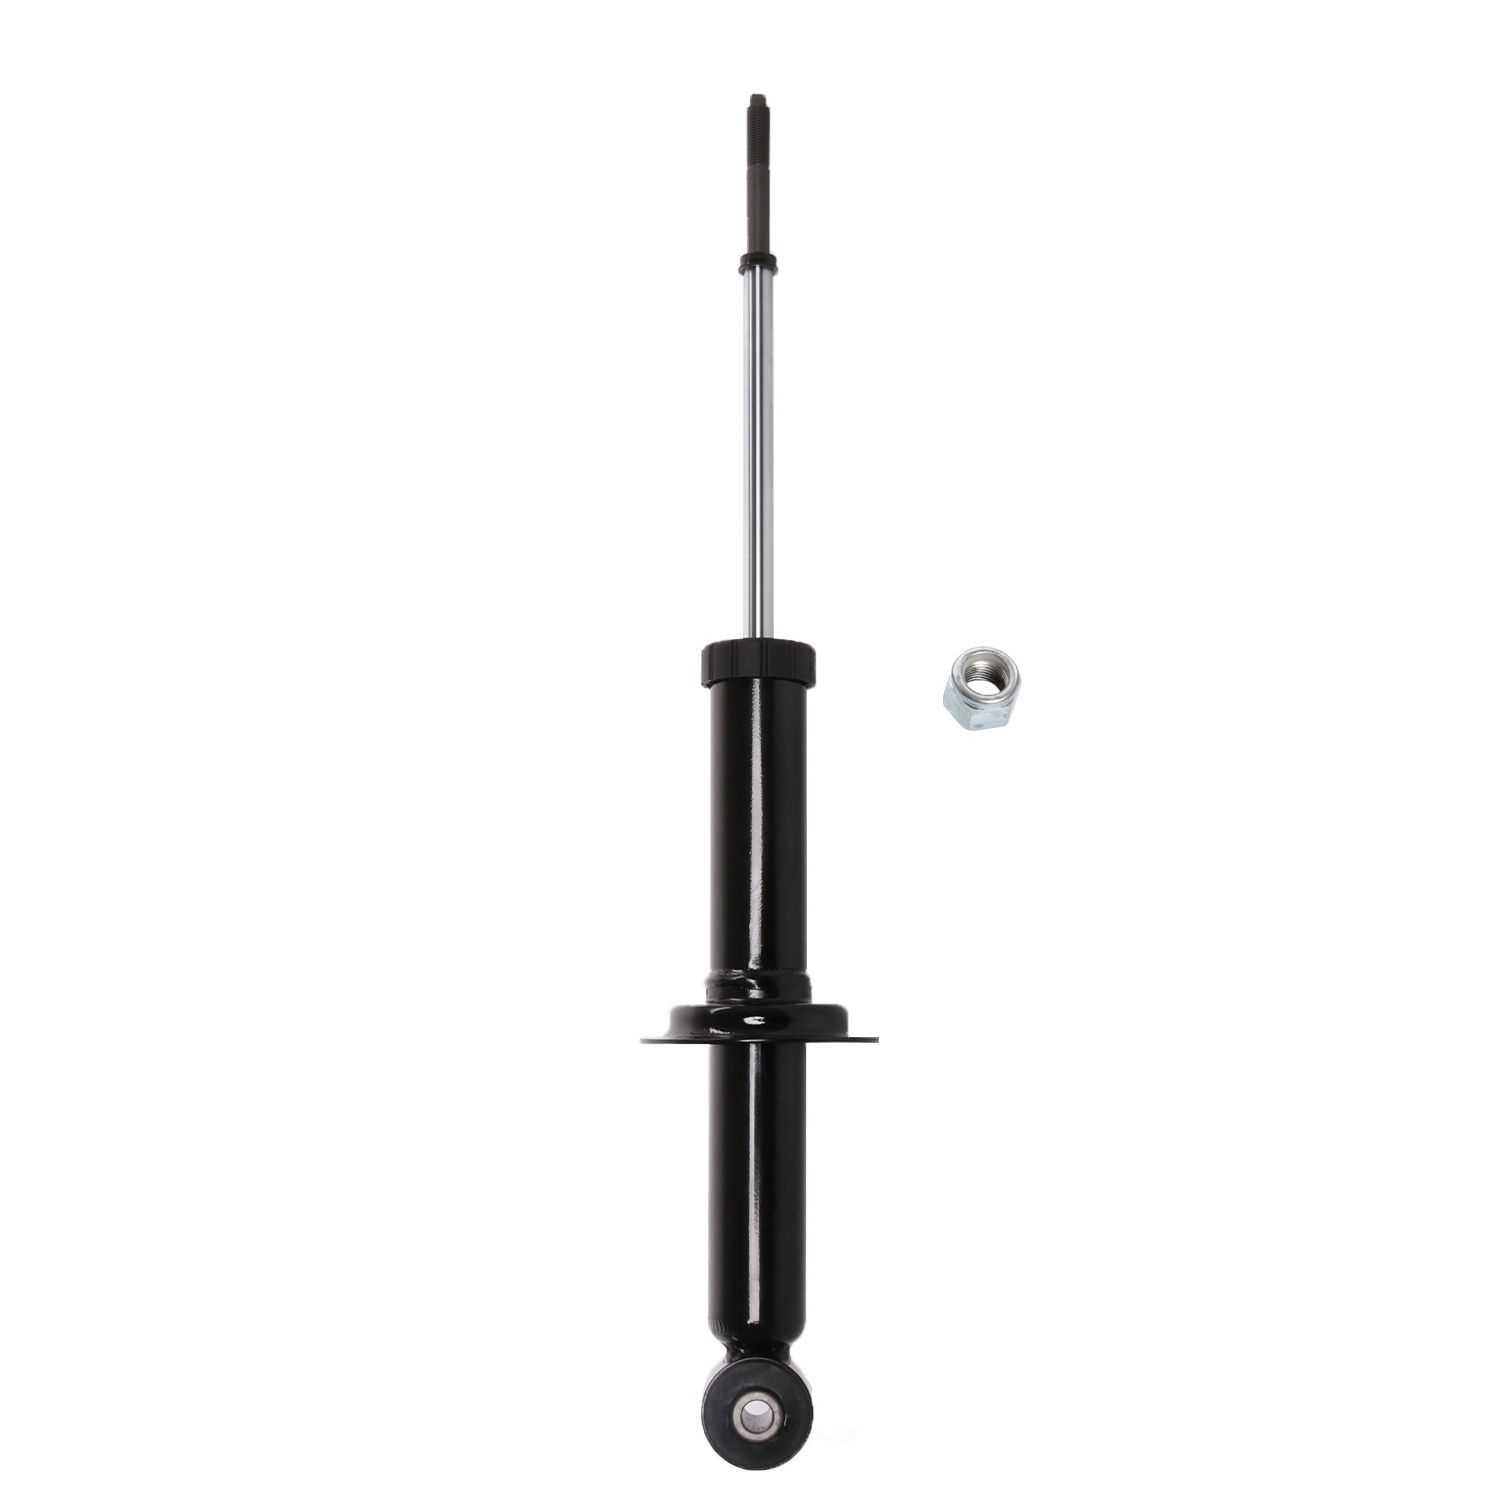 PERFORMANCE RIDE TECHNOLOGY BY ADD - Suspension Strut Assembly - P6T 372337